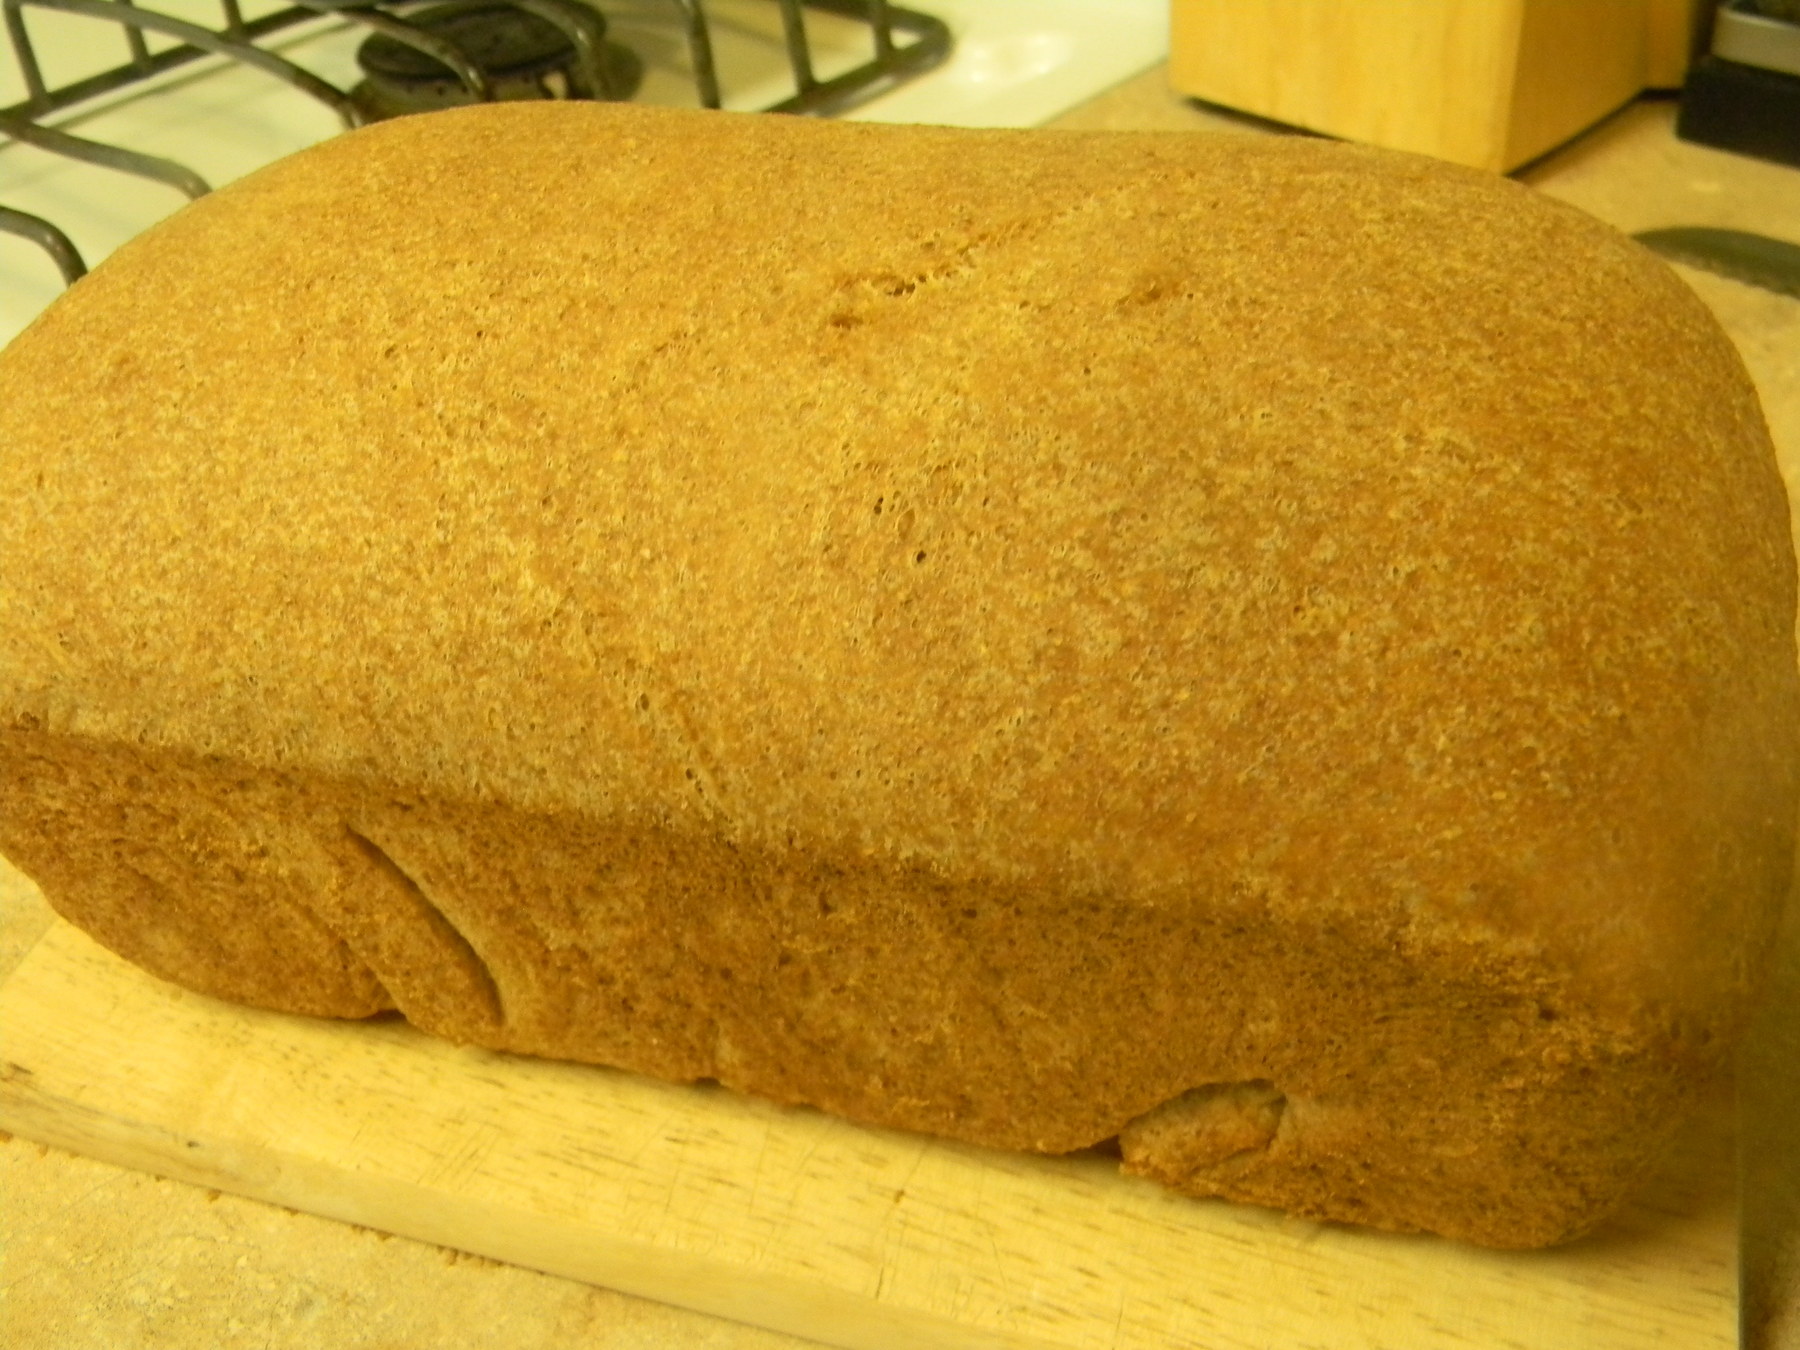 Nothing quite like the smell of homemade bread! 